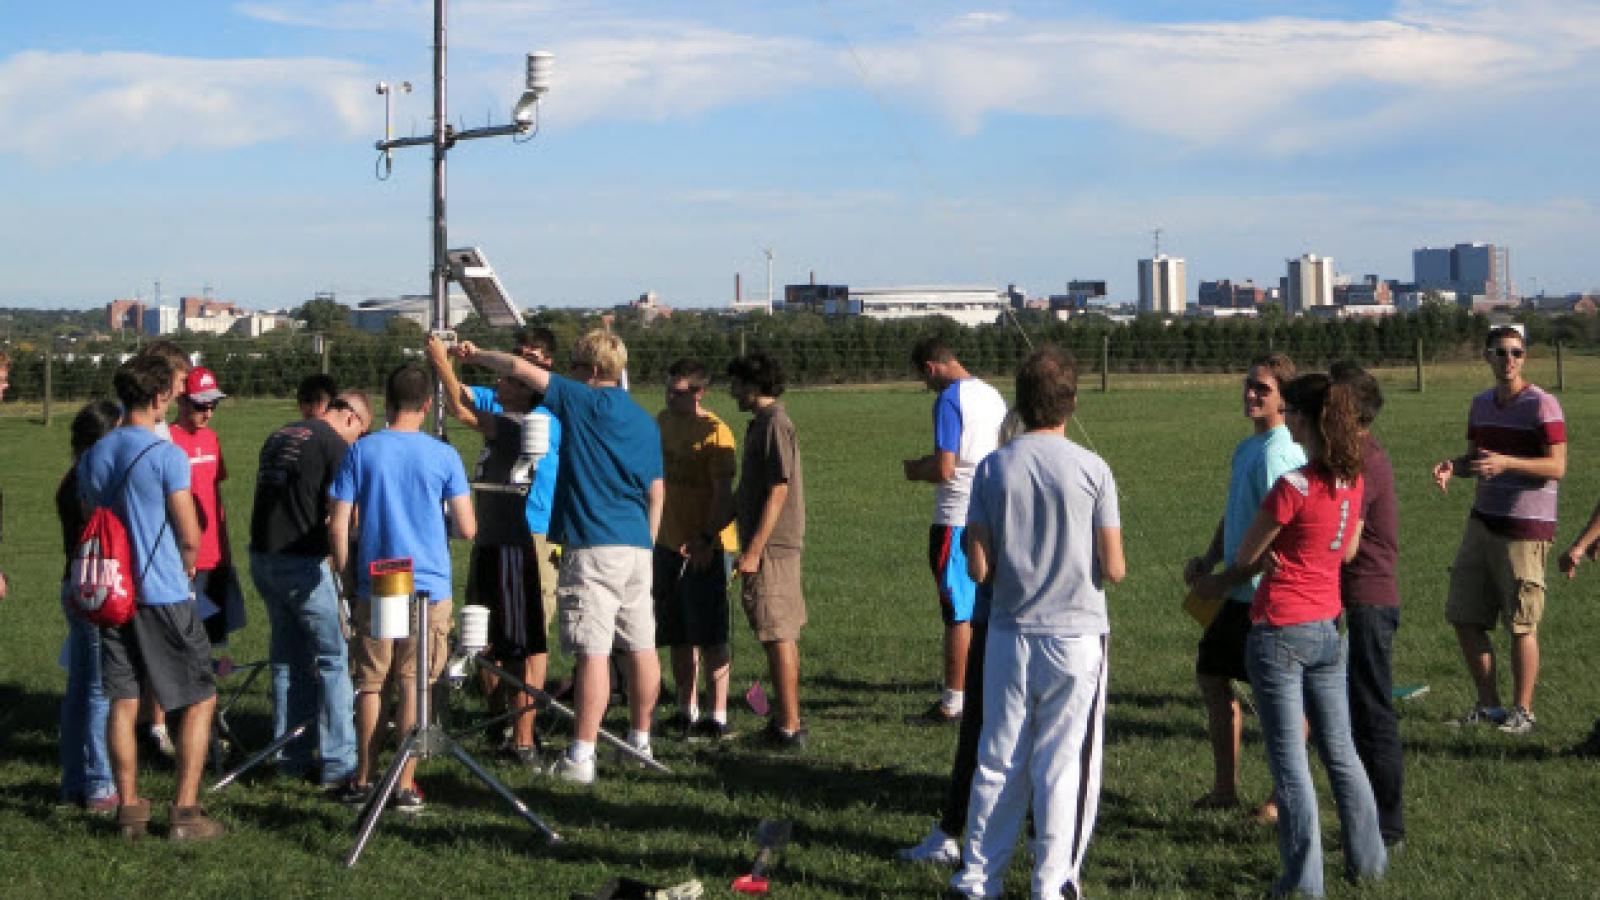 Students, of Microclimatology 5922, in action setting up a weather instruments tower